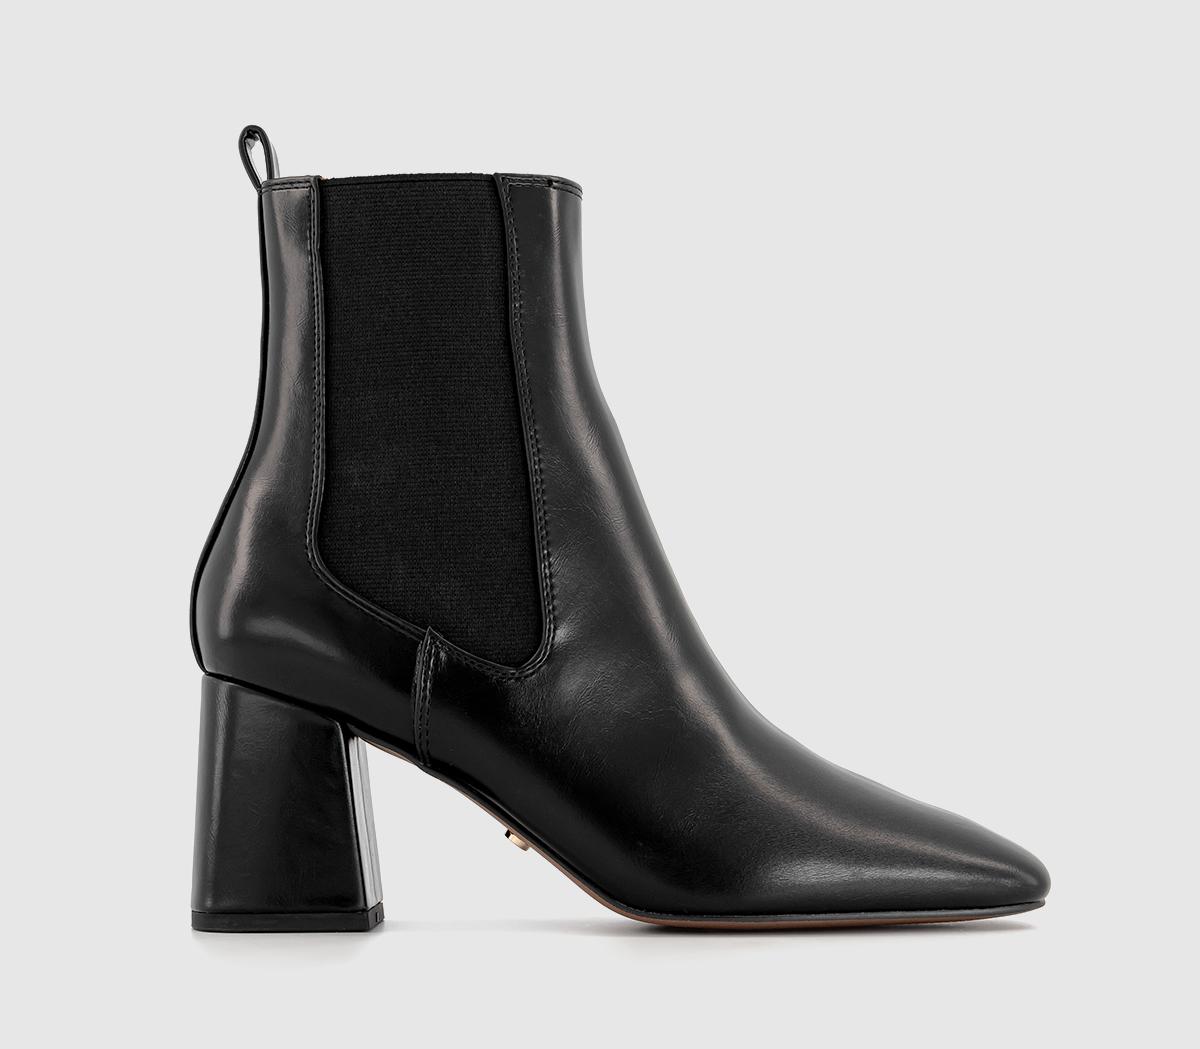 OFFICE Anna Block Heel Chelsea Boots Black - Women's Ankle Boots